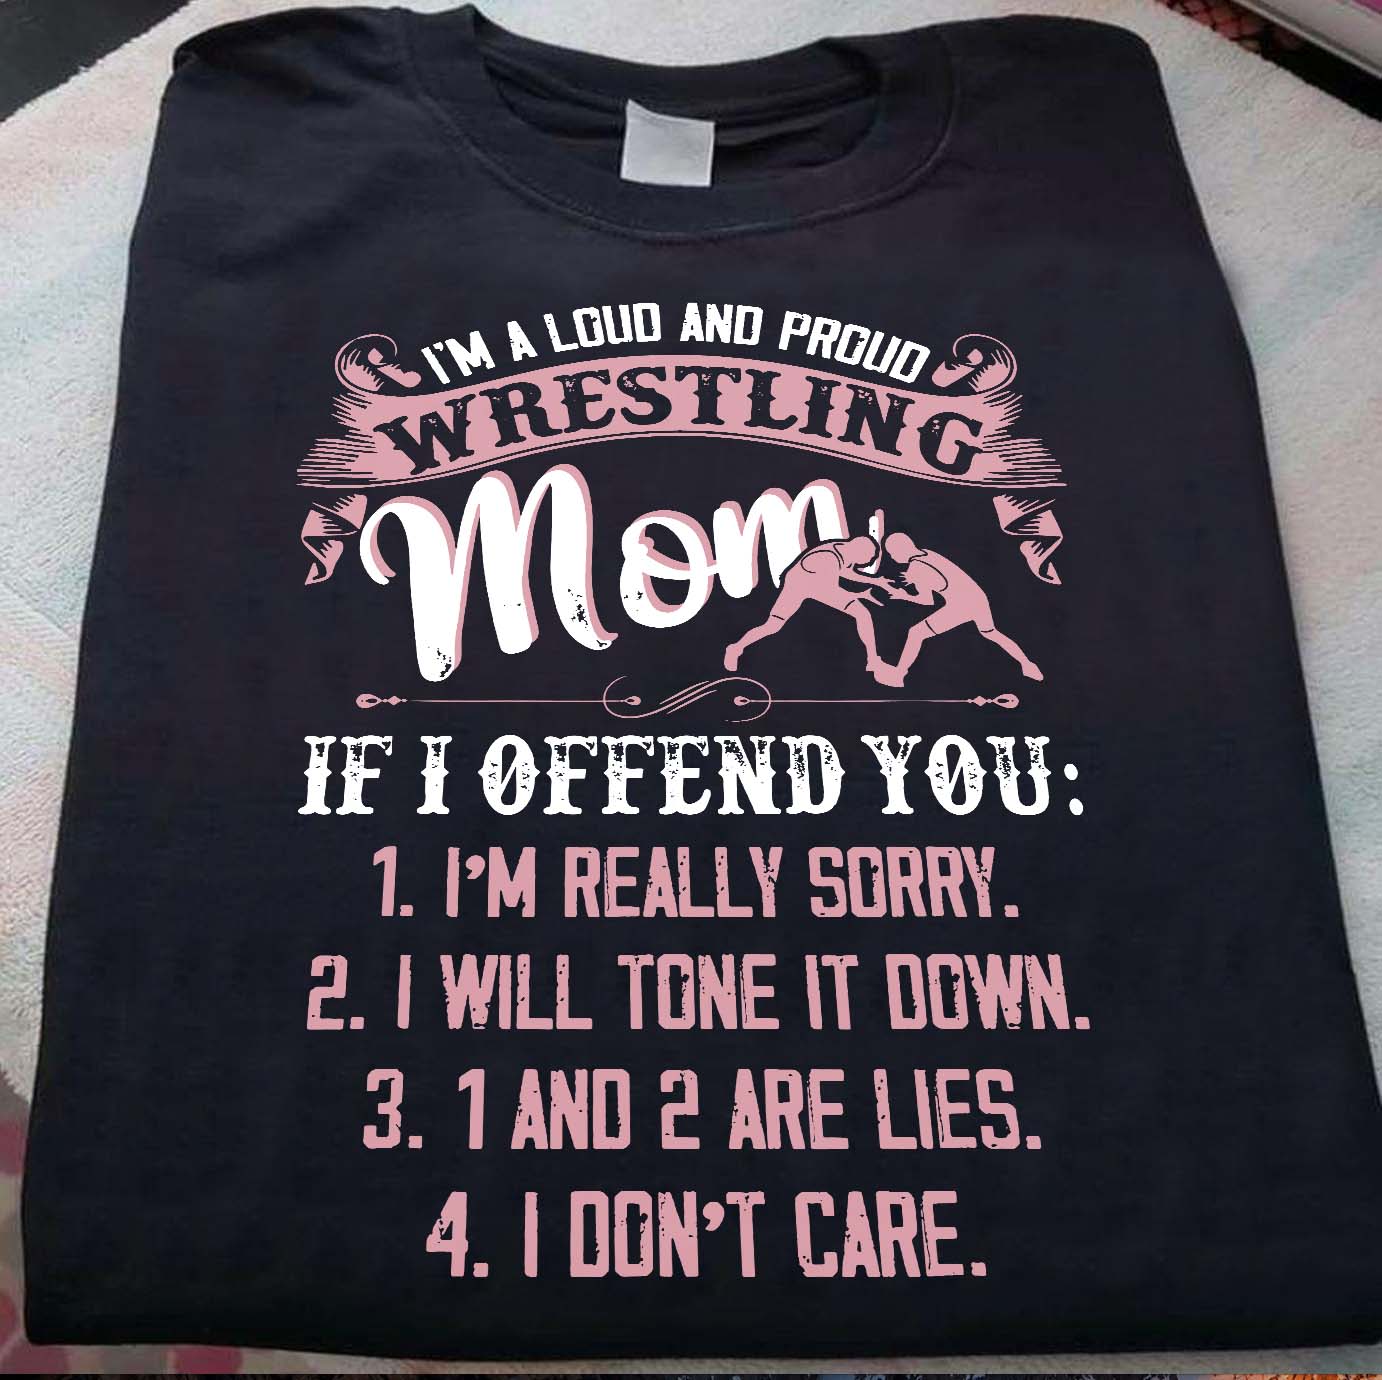 I'm a loud and proud wrestling mom if I offend you I'm really sorry, I will tone it down - Mother's day